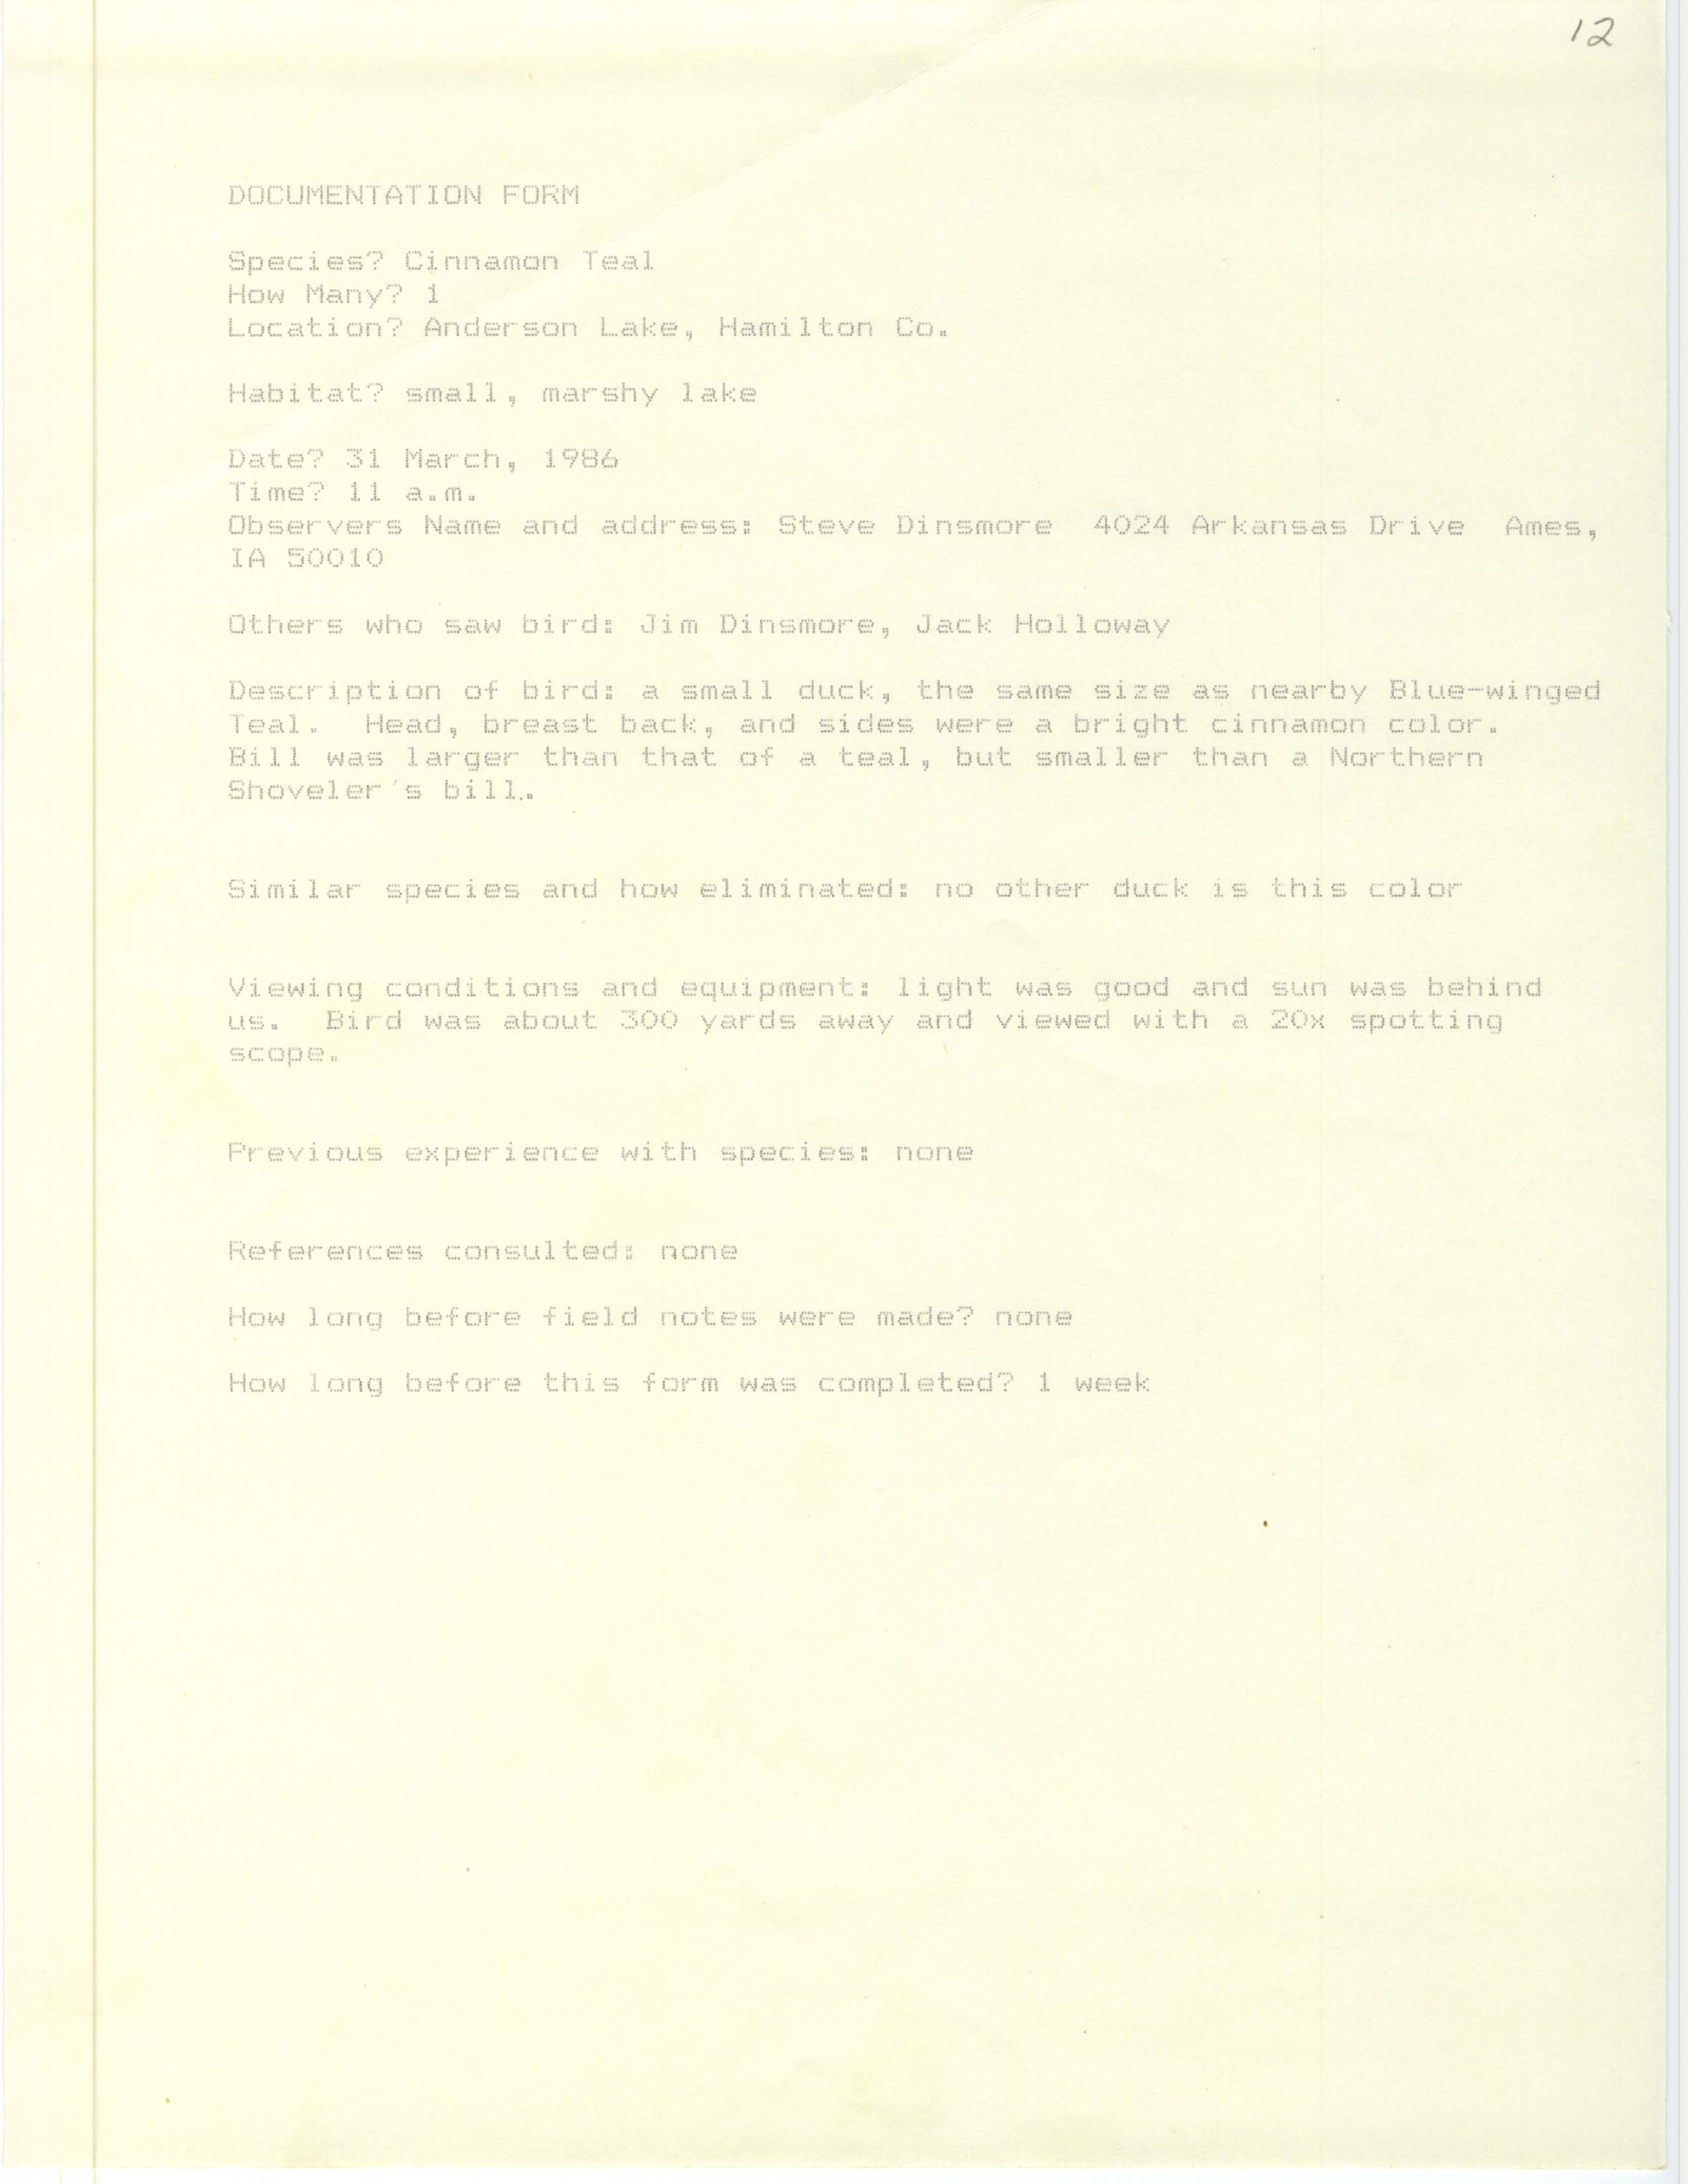 Rare bird documentation form for Cinnamon Teal at Anderson Lake in 1986